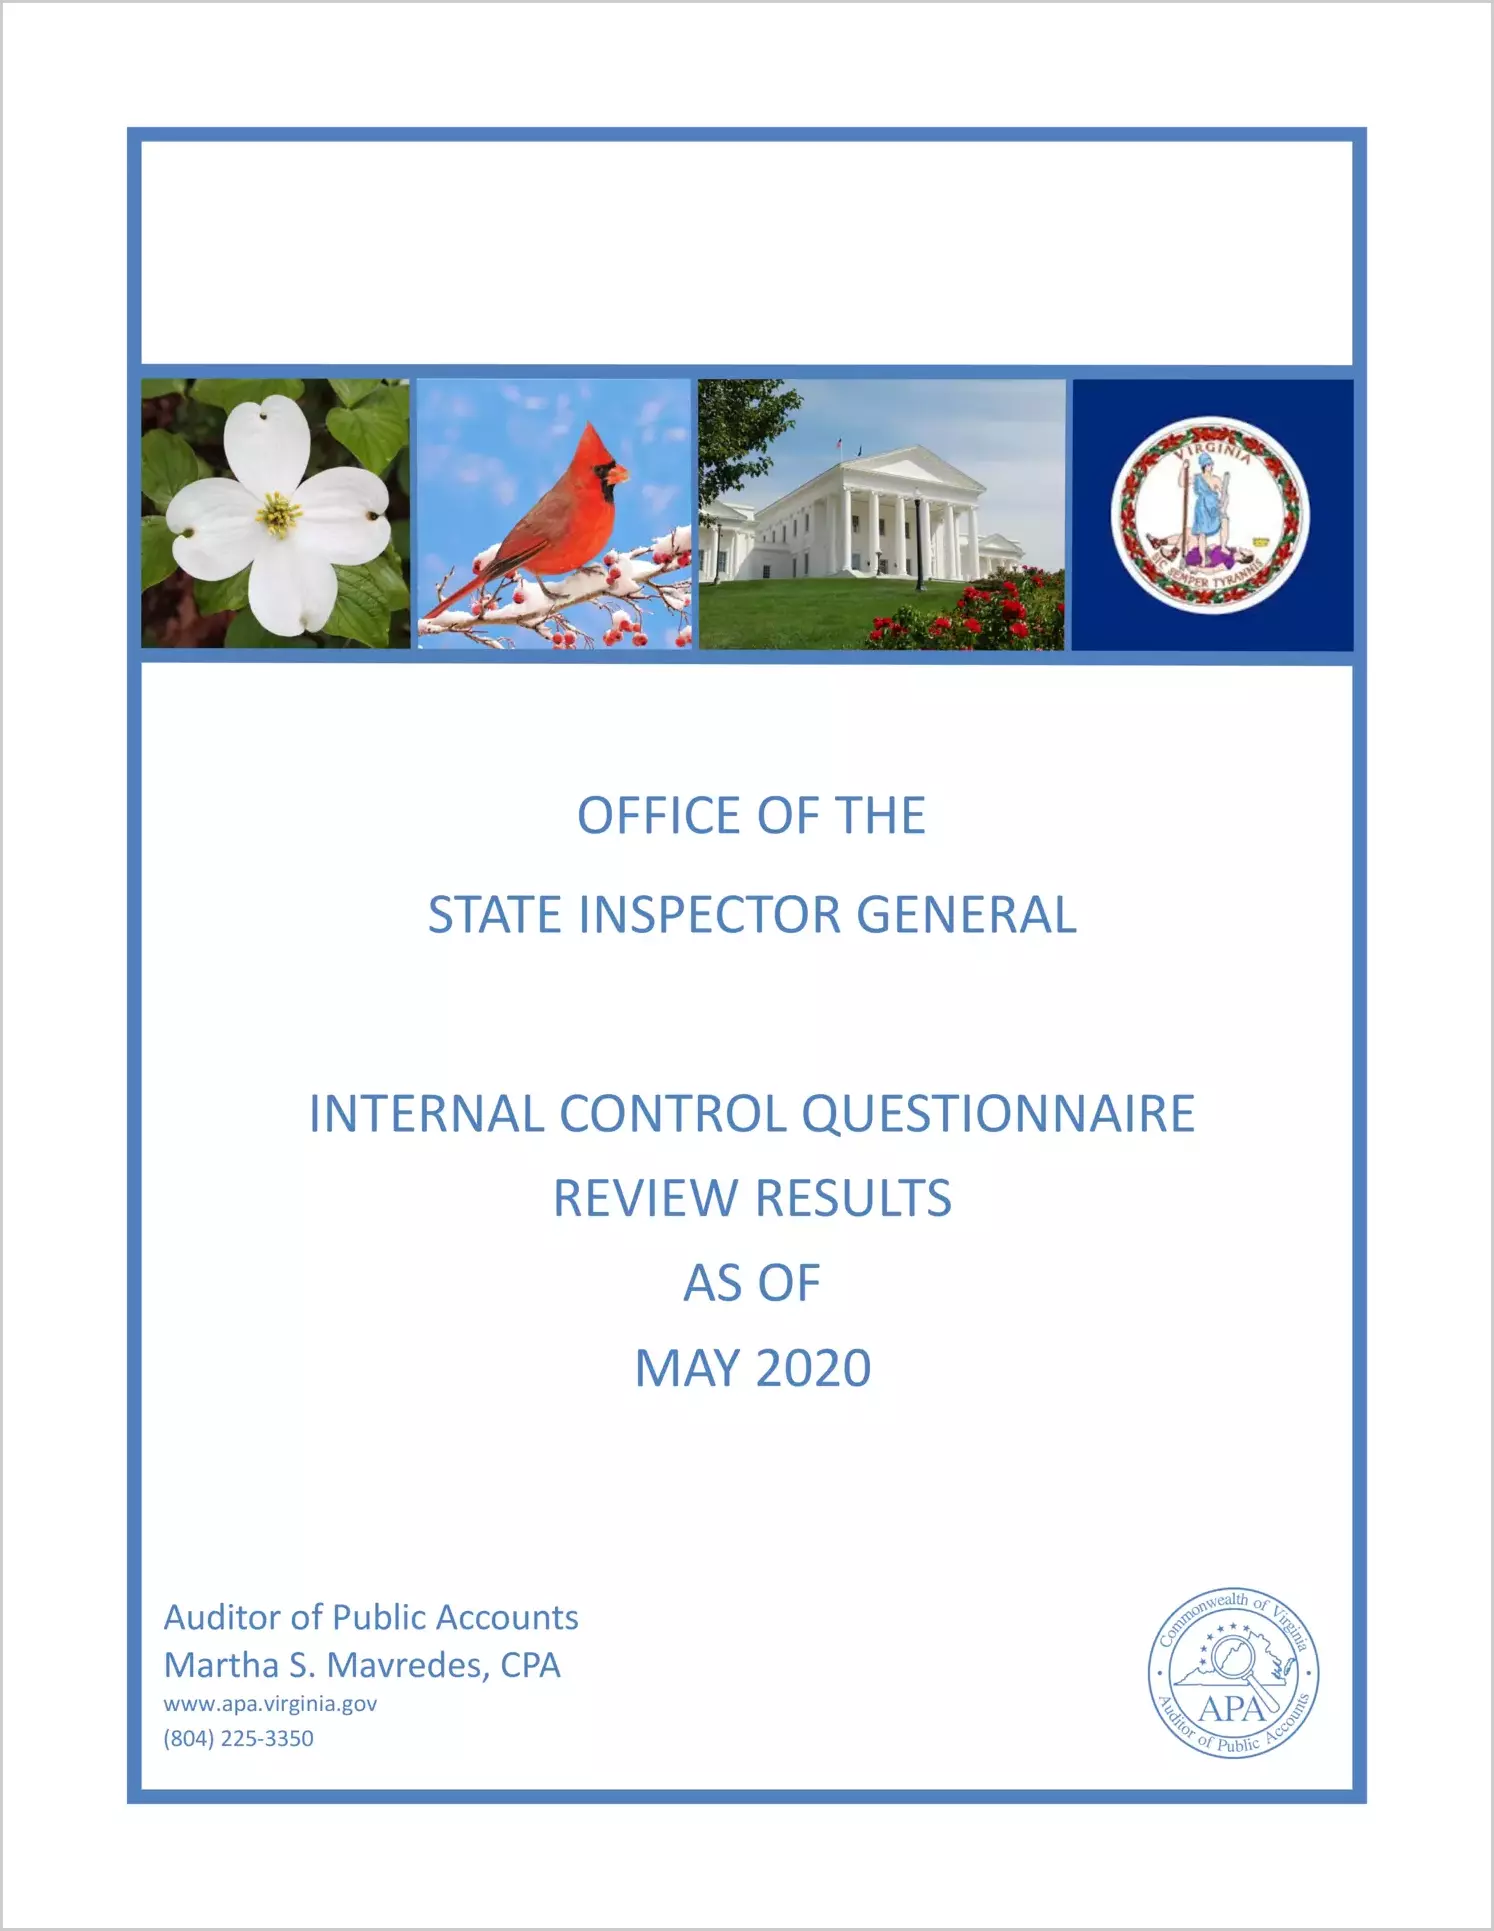 Office of the State Inspector General Internal Control Questionnaire Review Results as of May 2020